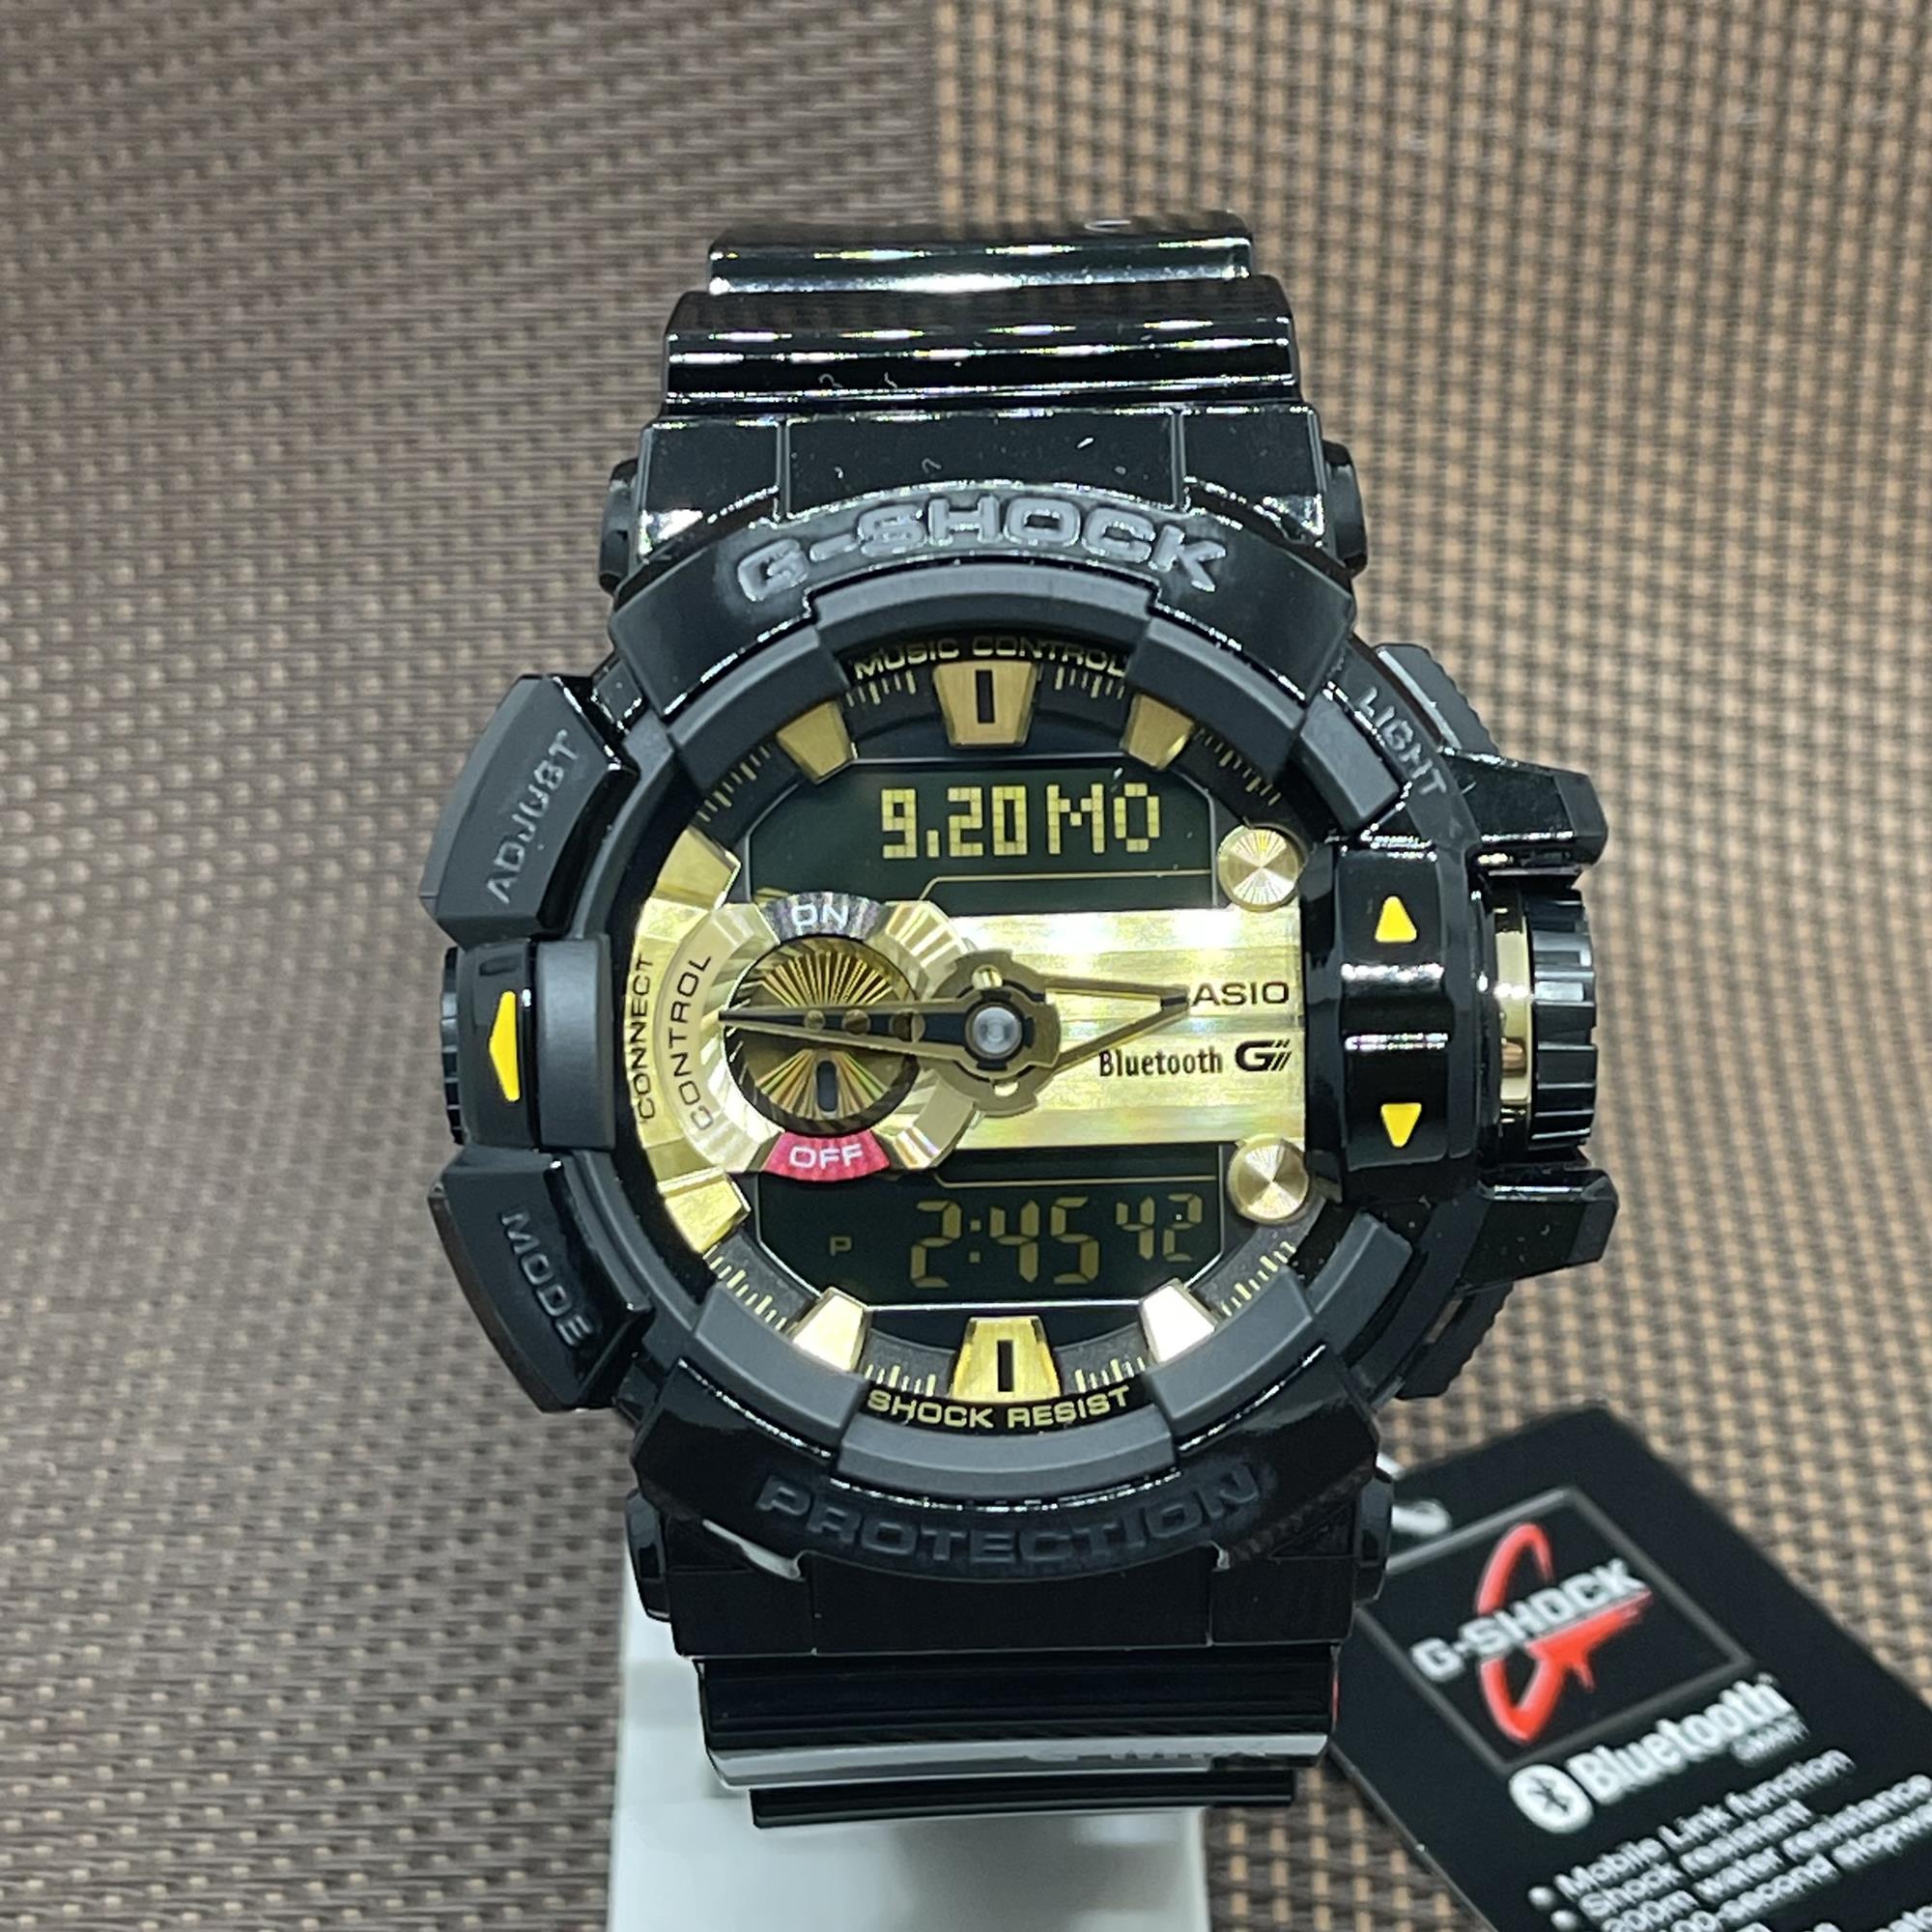 TimeYourTime] Casio G-Shock G'Mix GBA-400-1A9 Black Resin Analog